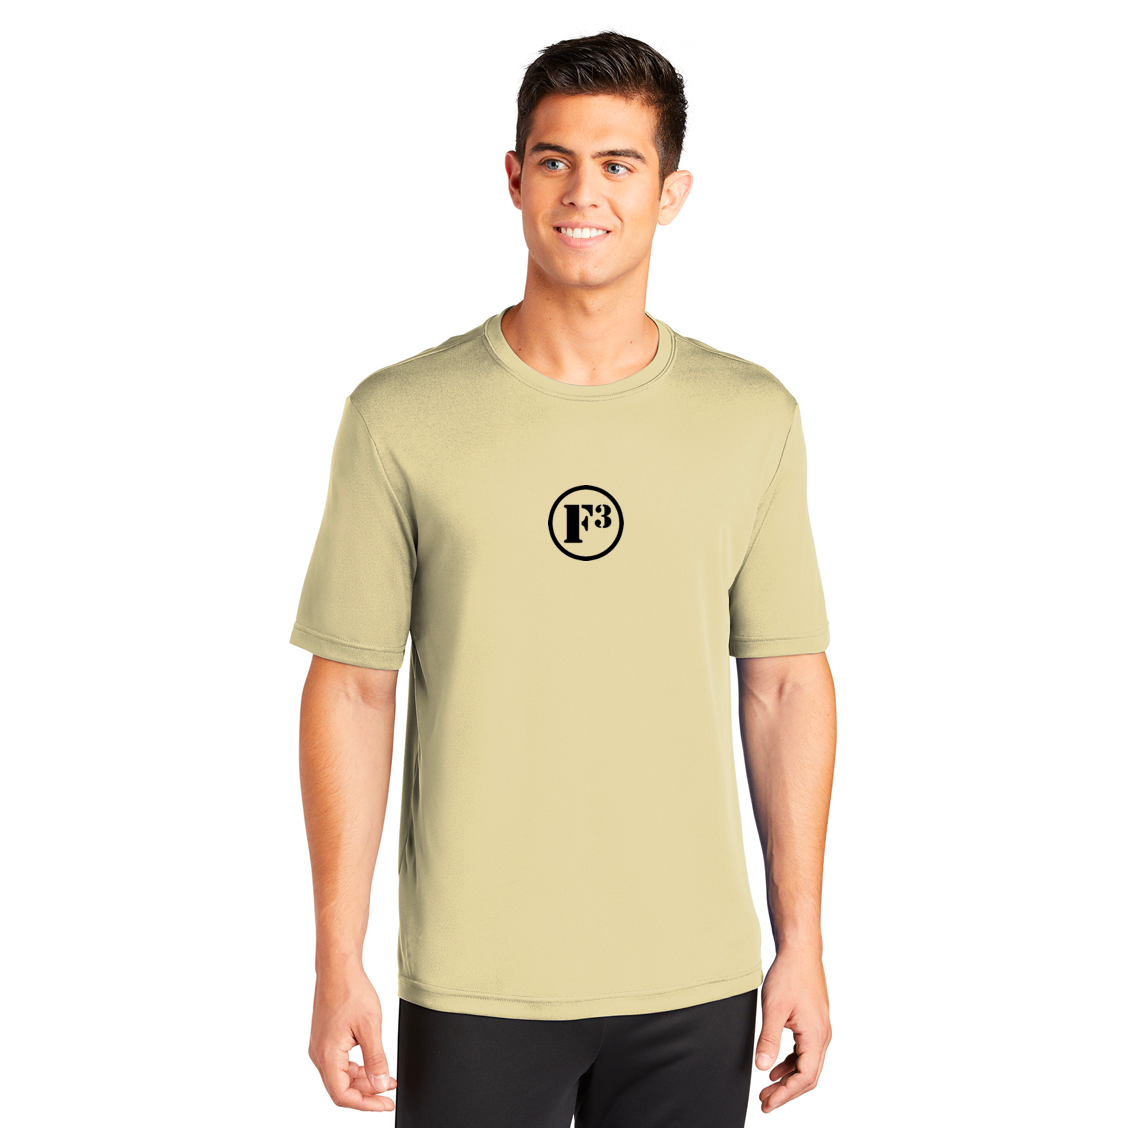 F3 Sport-Tek Adult PosiCharge Competitor Tee Short Sleeve (with Black logo) - Made to Order